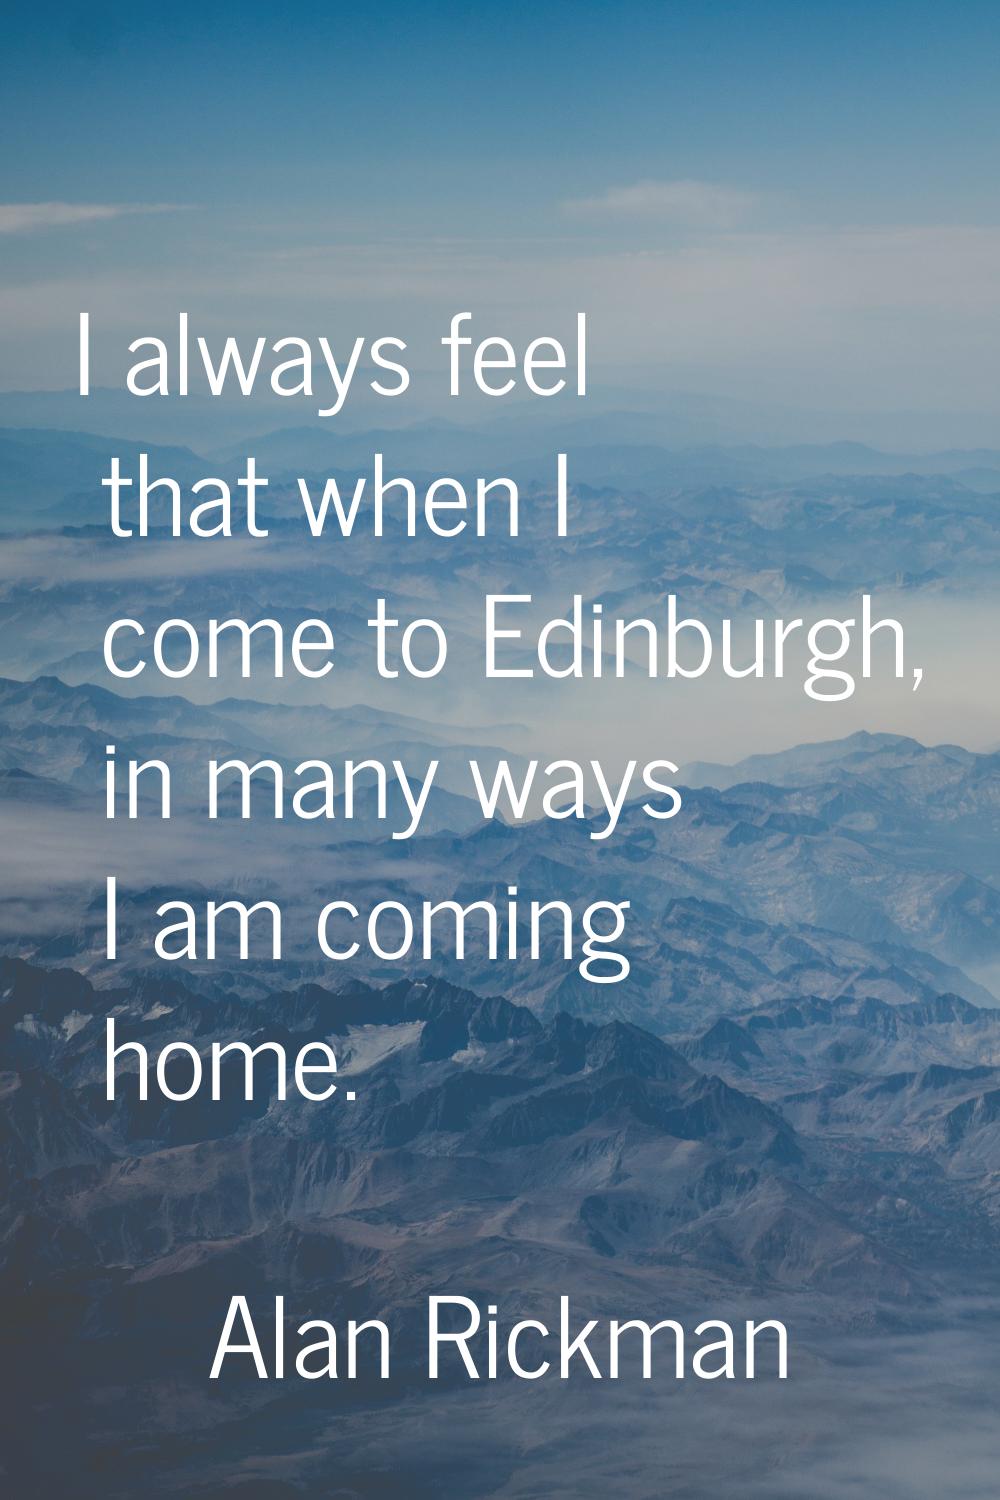 I always feel that when I come to Edinburgh, in many ways I am coming home.